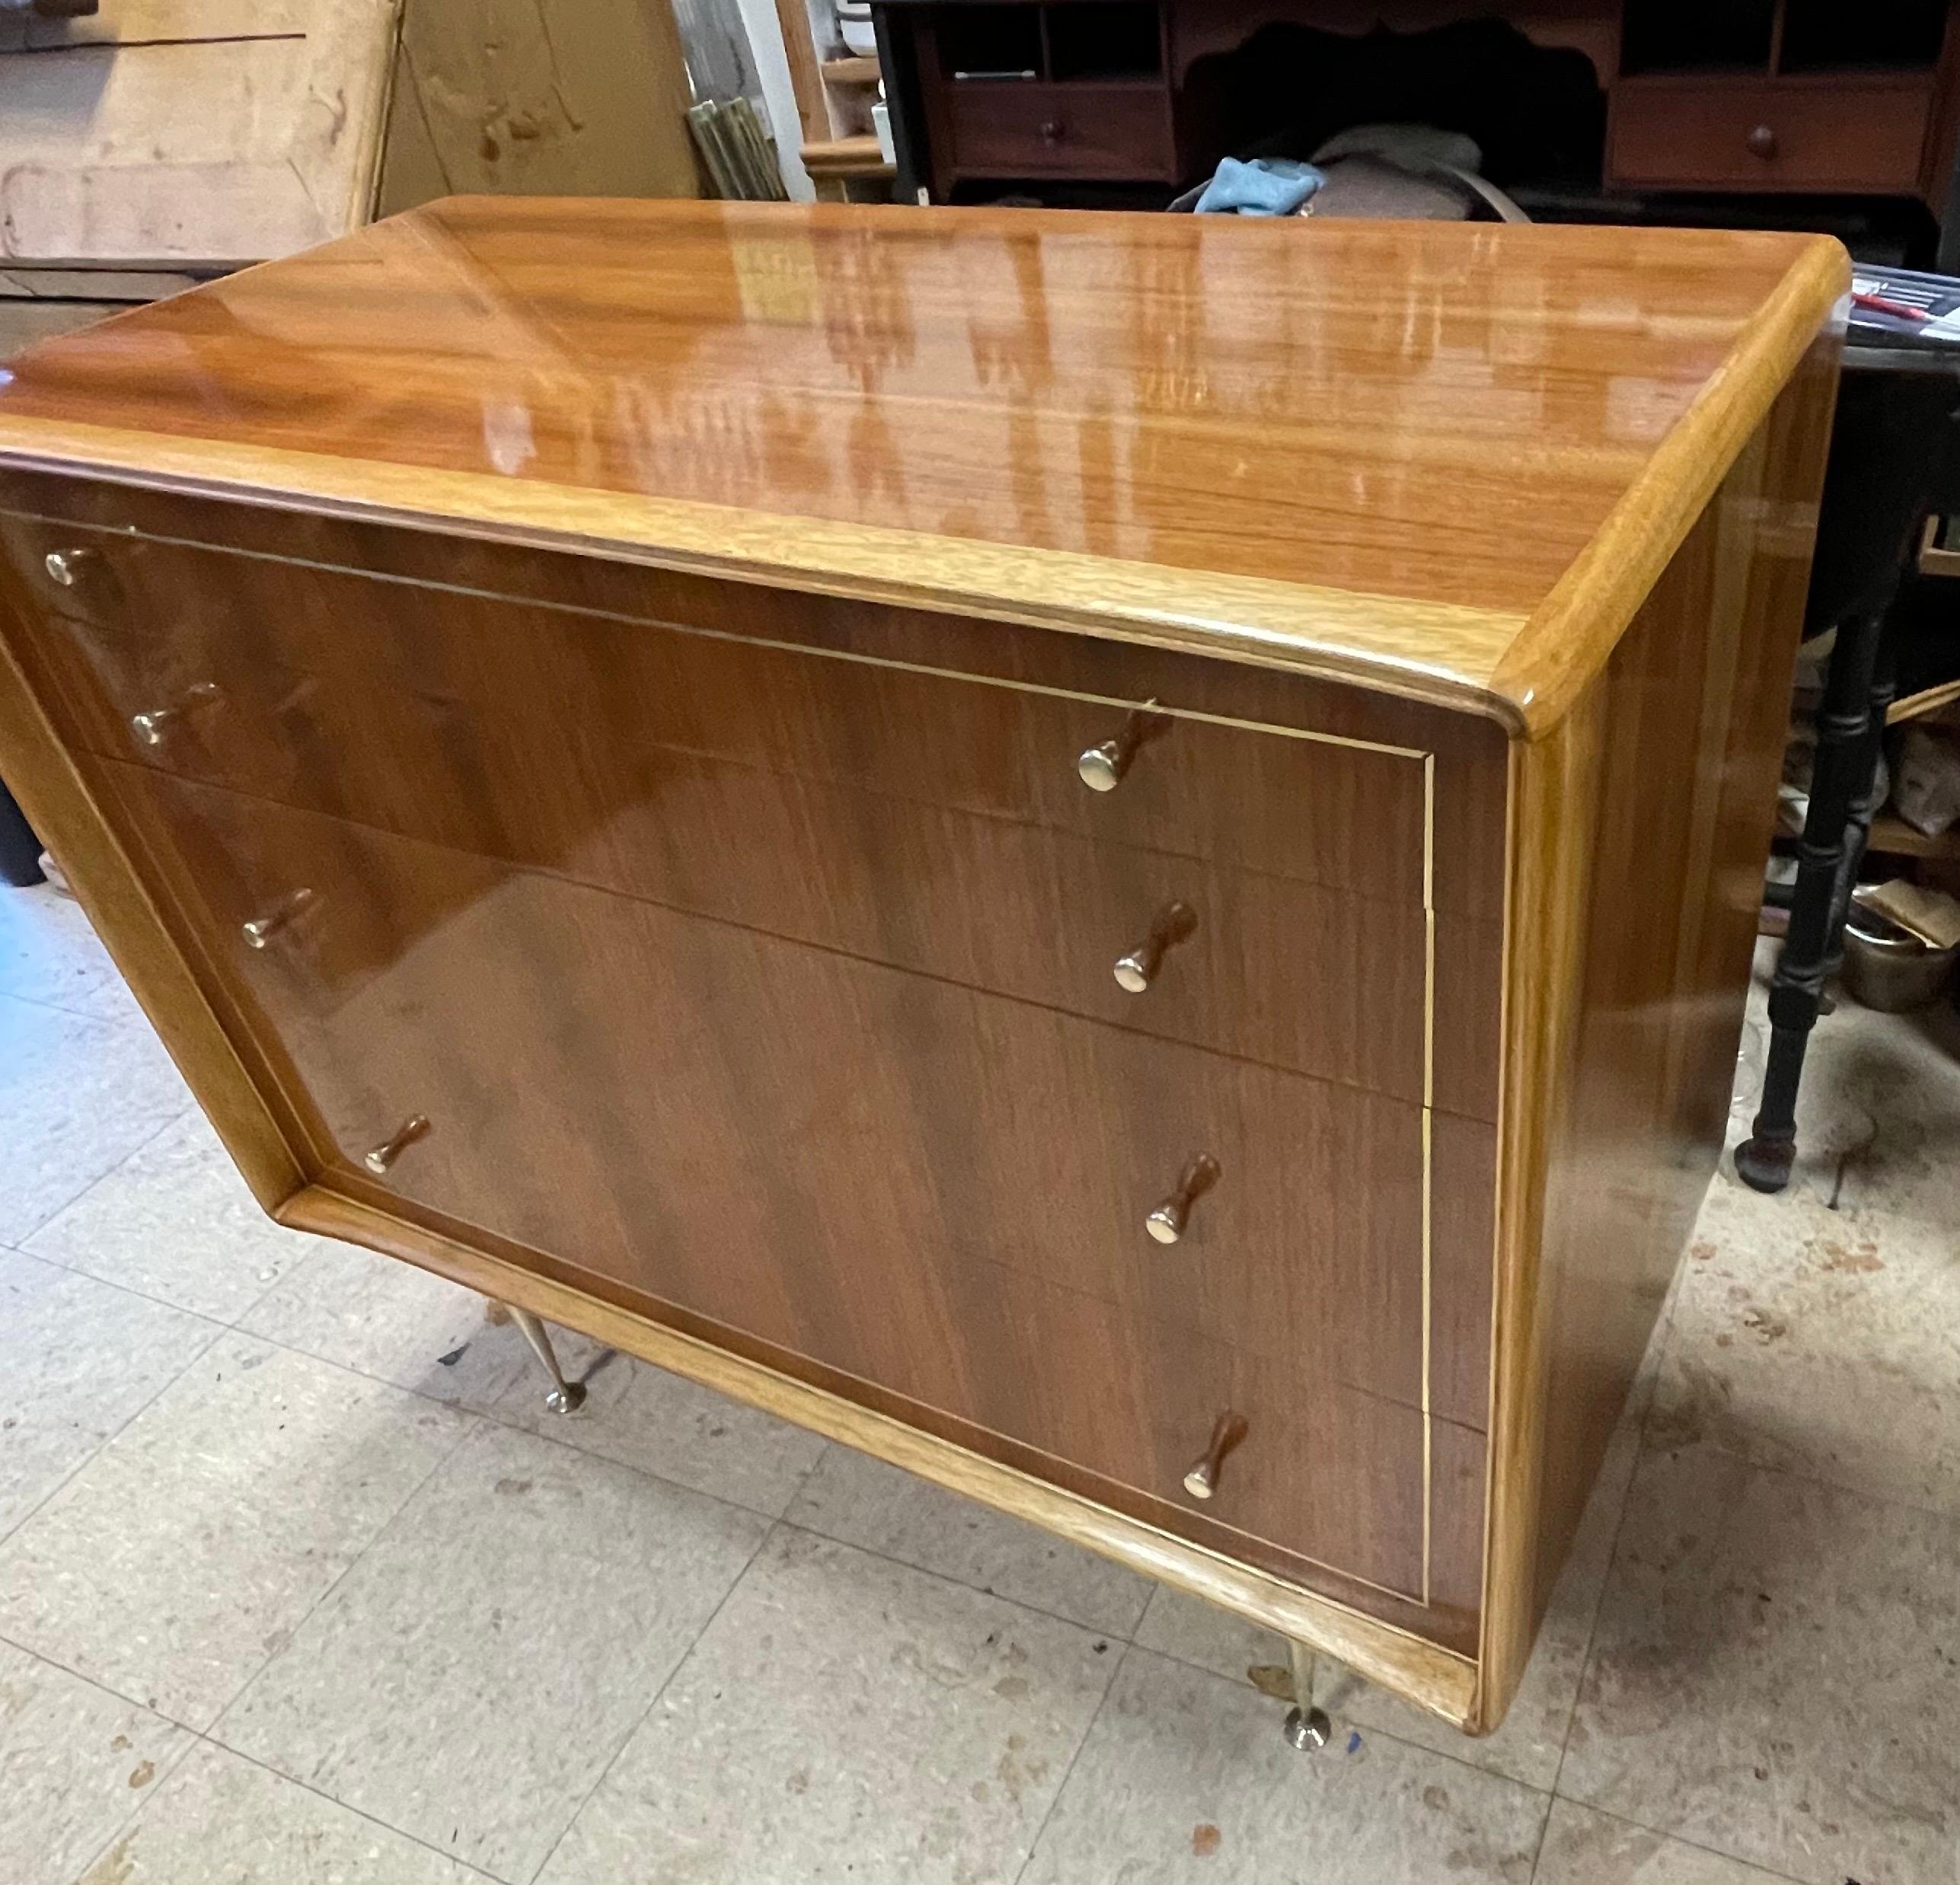 Beautiful Mid Century dresser by Erno Fabry, made in West Germany. Teak with Butternut framing, solid brass tapered legs, brass pulls and brass inlay. Professionally restored and French hand-polished by Master-craftsman Mark Mendelson, NY.

Erno